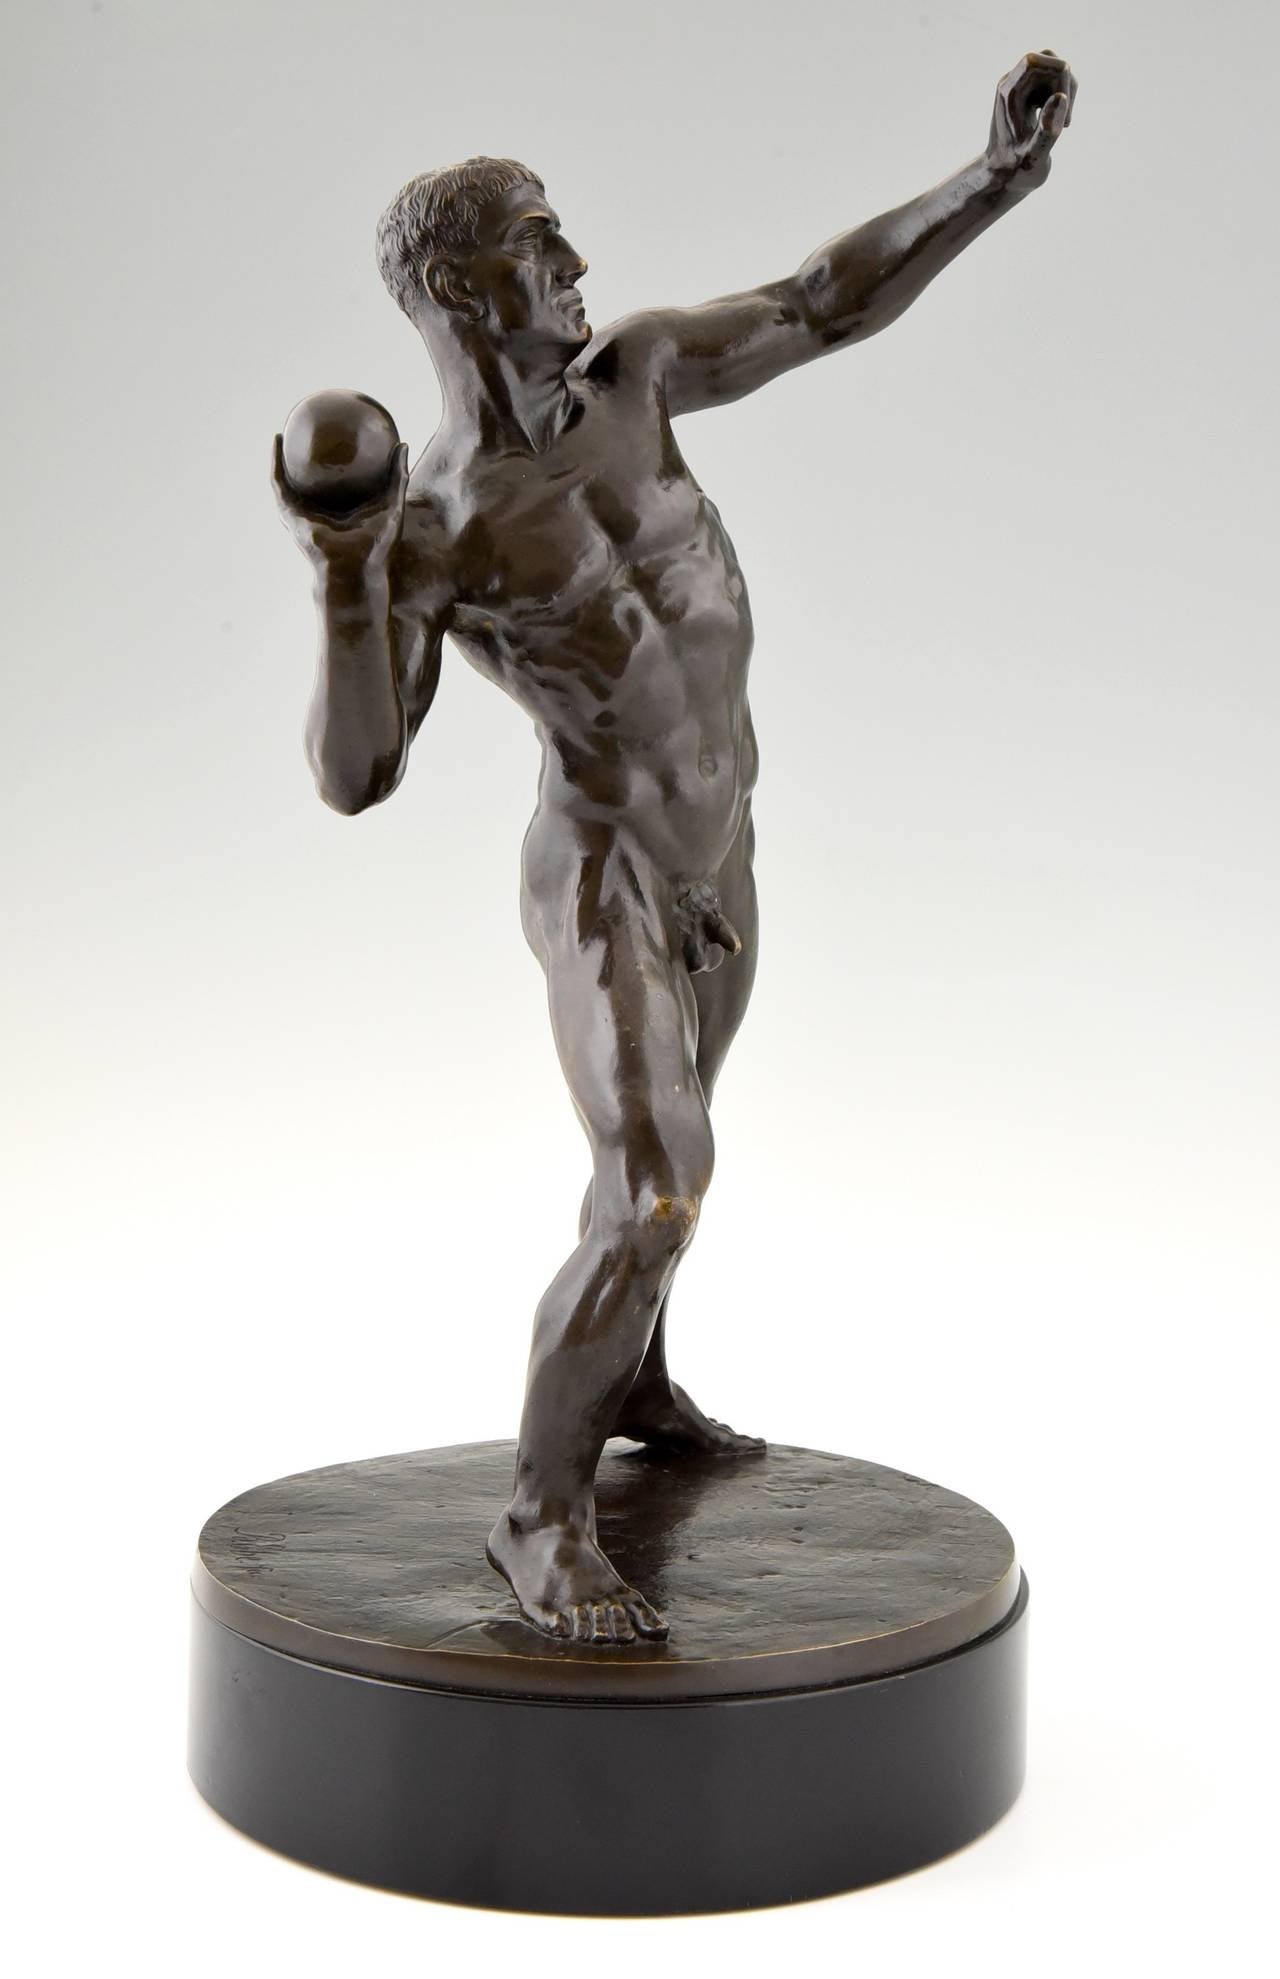 German Bronze Sculpture of a Male Nude Athlete Playing Shot Put by B. Ebe, 1930